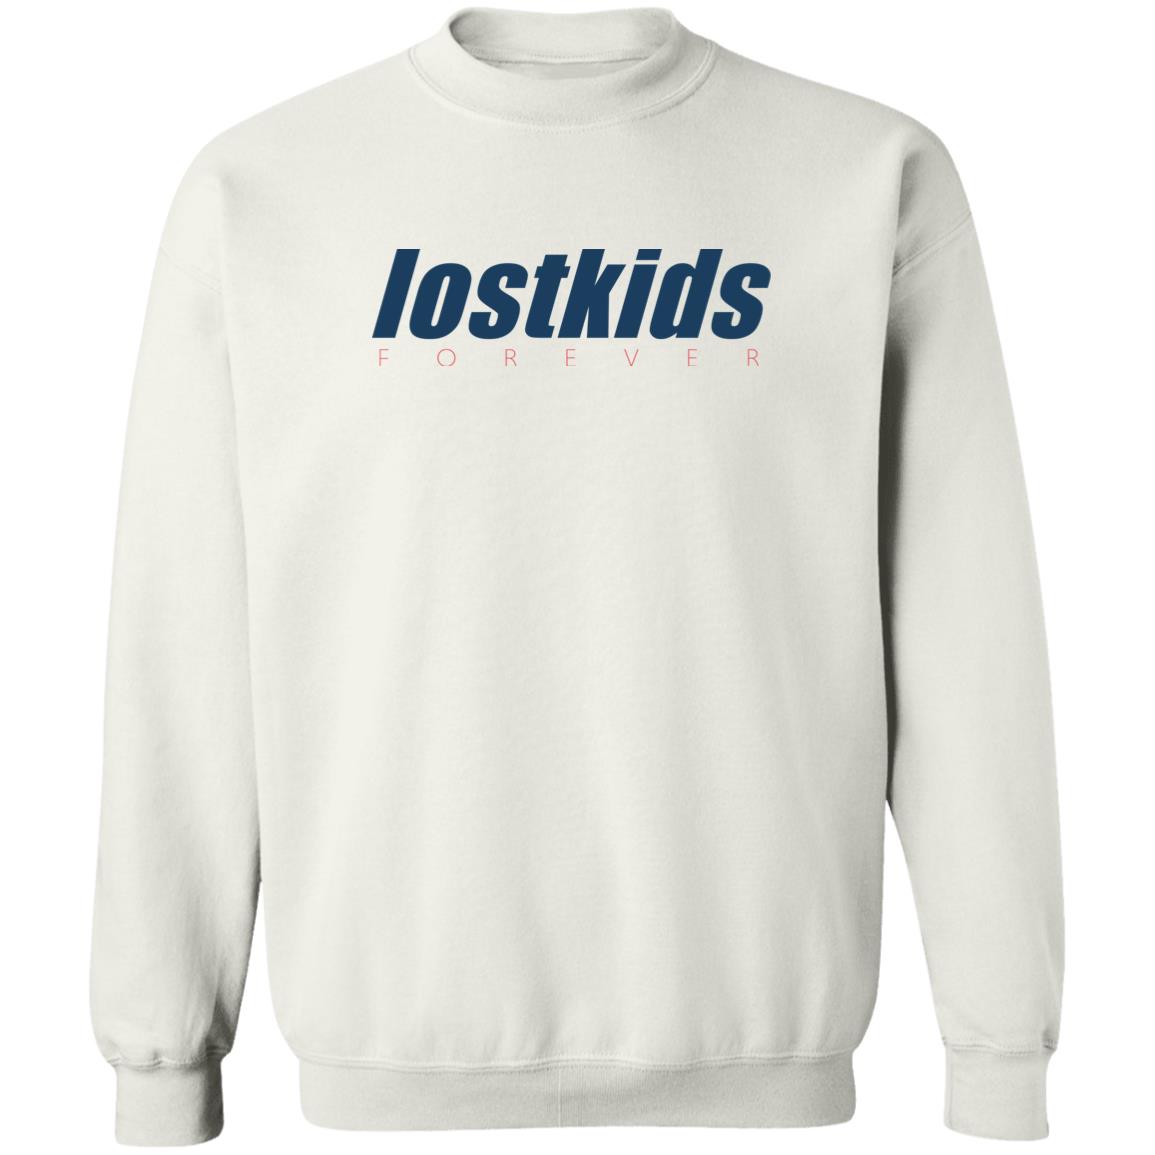 Lost Kids Forever Shirt 2